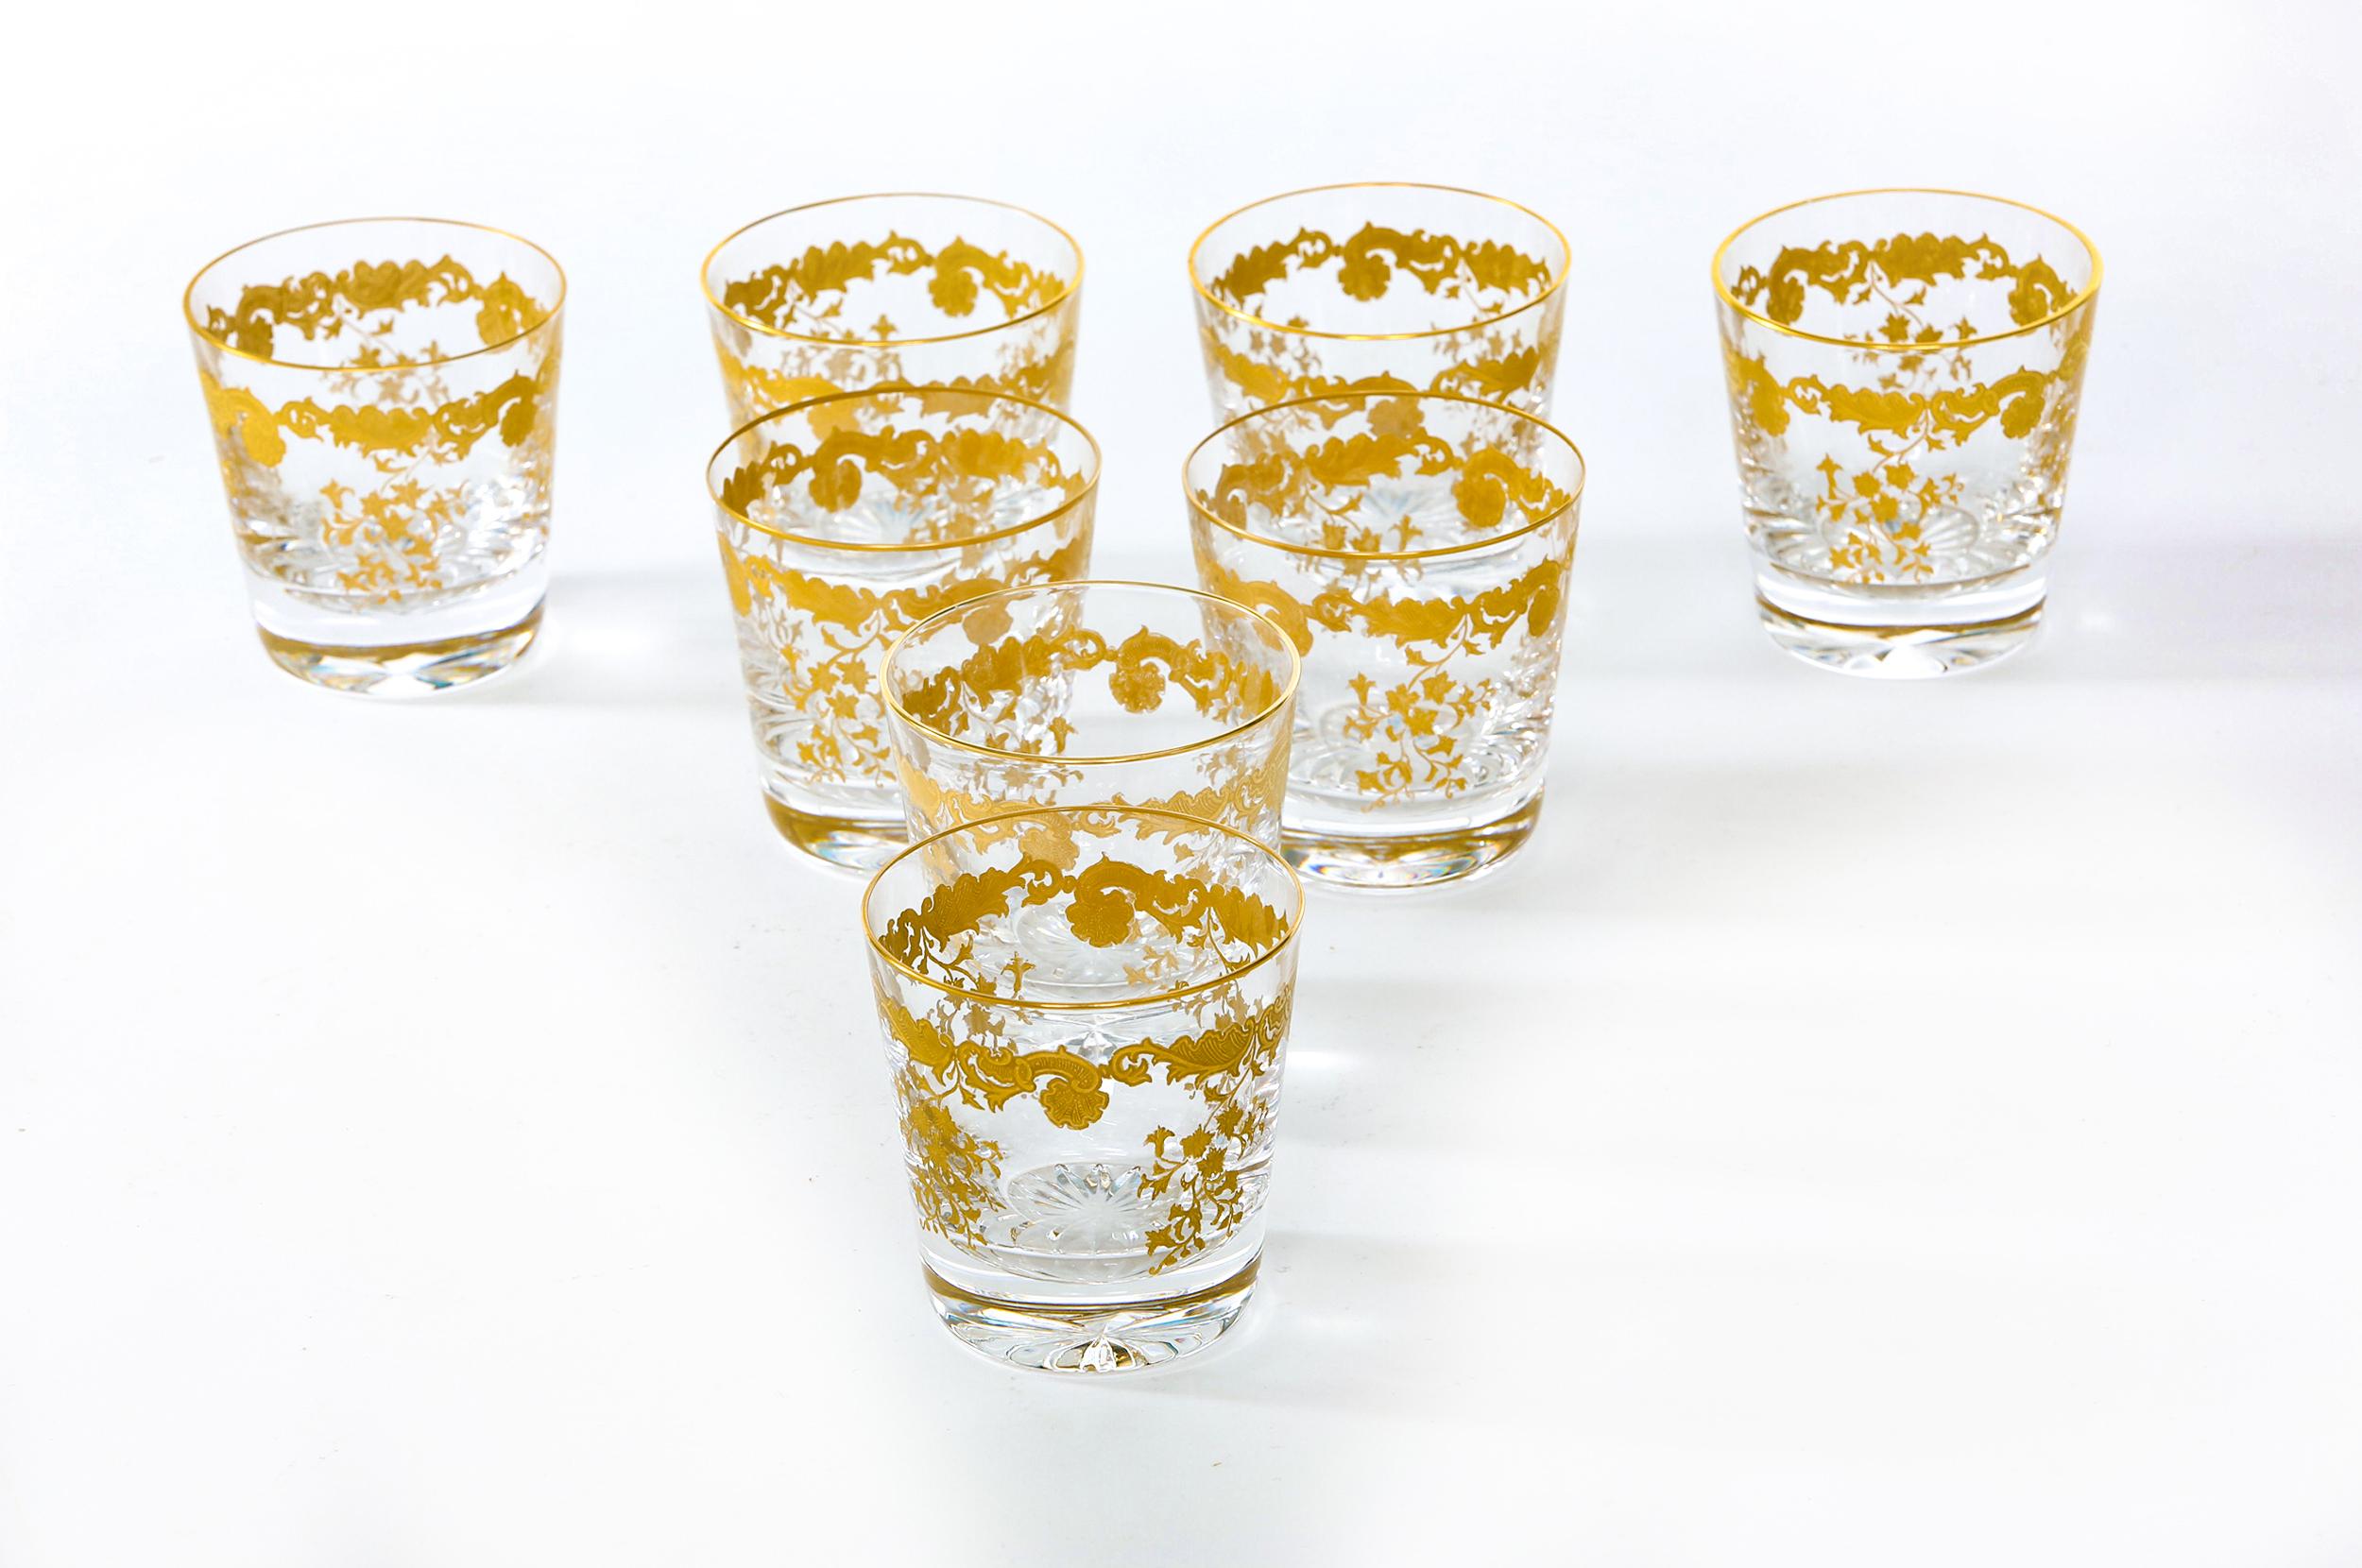 Mid-20th century Saint Louis crystal with gold design details tableware or barware whiskey or scotch service for eight people. Each one is in great condition. Maker's mark stamped undersigned. Each one stands about 3.5 inches tall x 3.4 inches